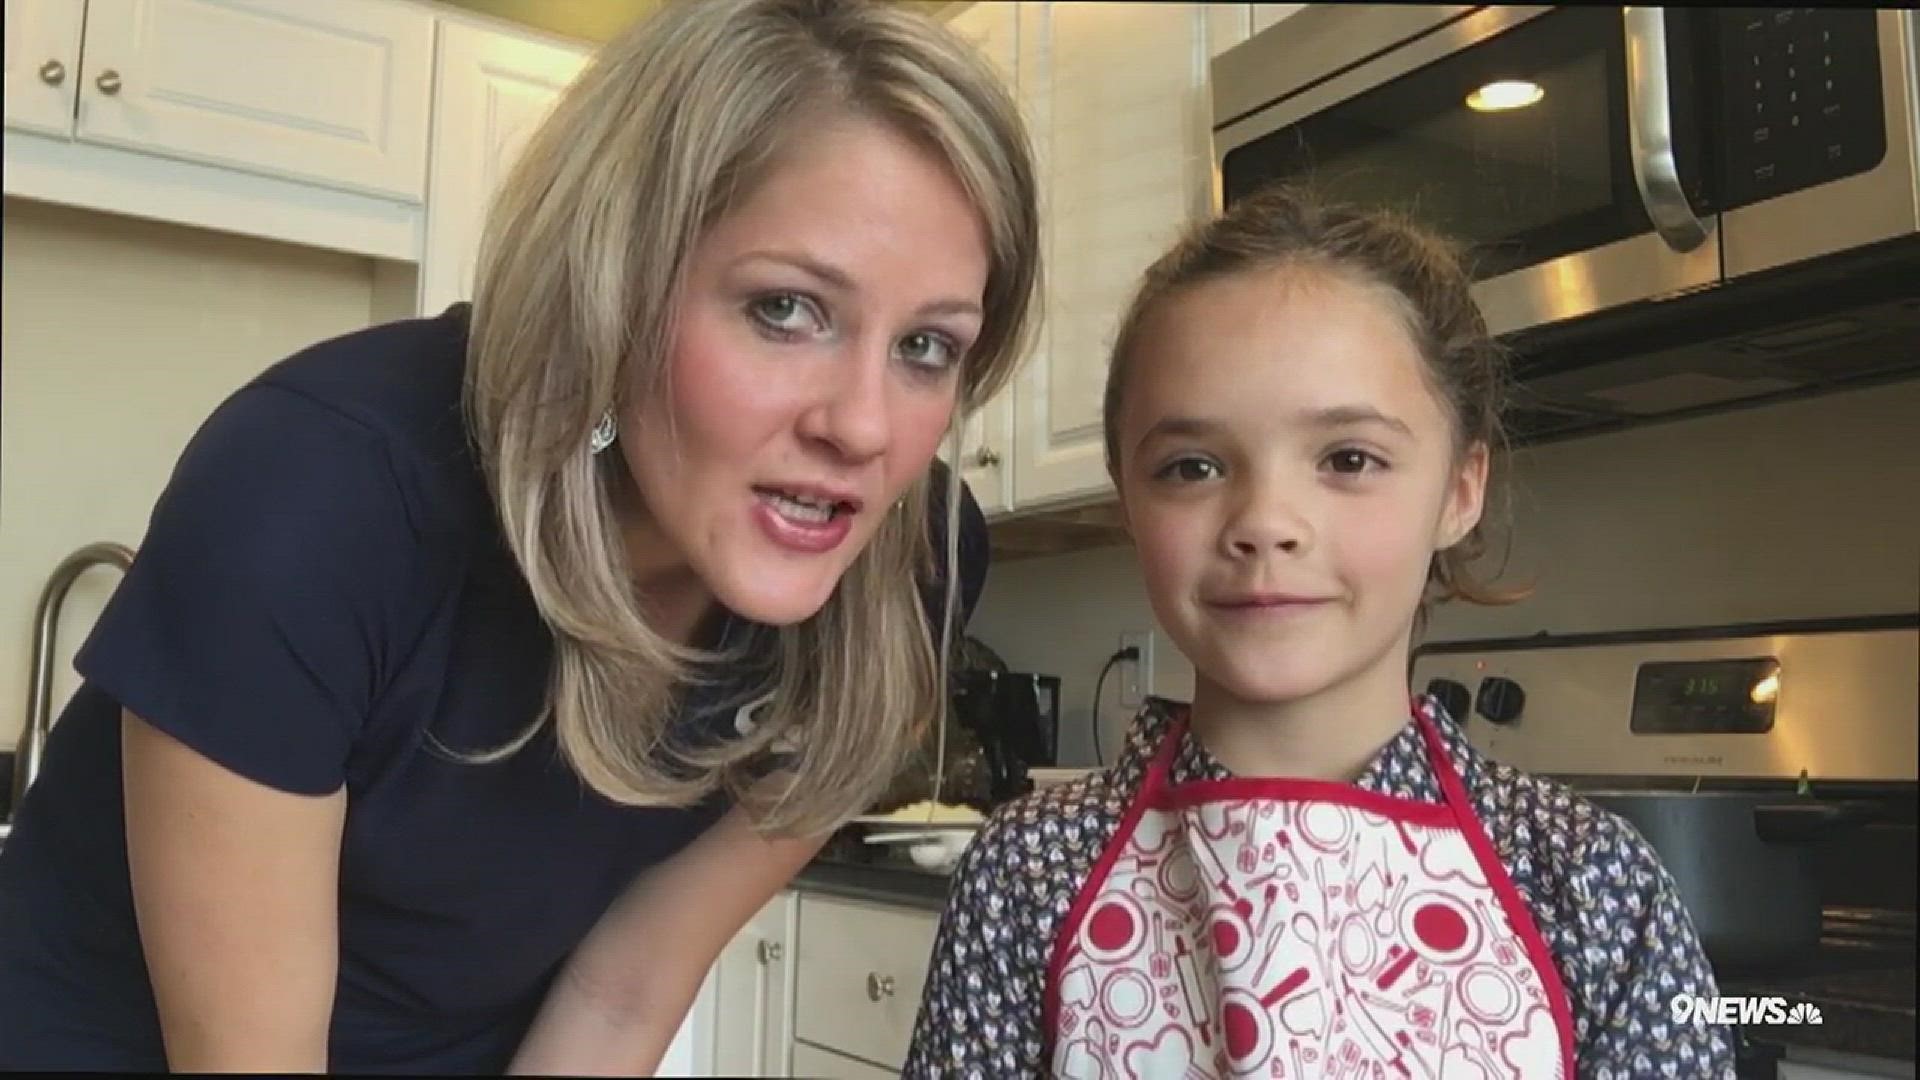 Need a recipe for green bean casserole? 9NEWS executive digital producer Caitlin Hendee and her 8-year-old daughter Amaya have a family favorite you can try!